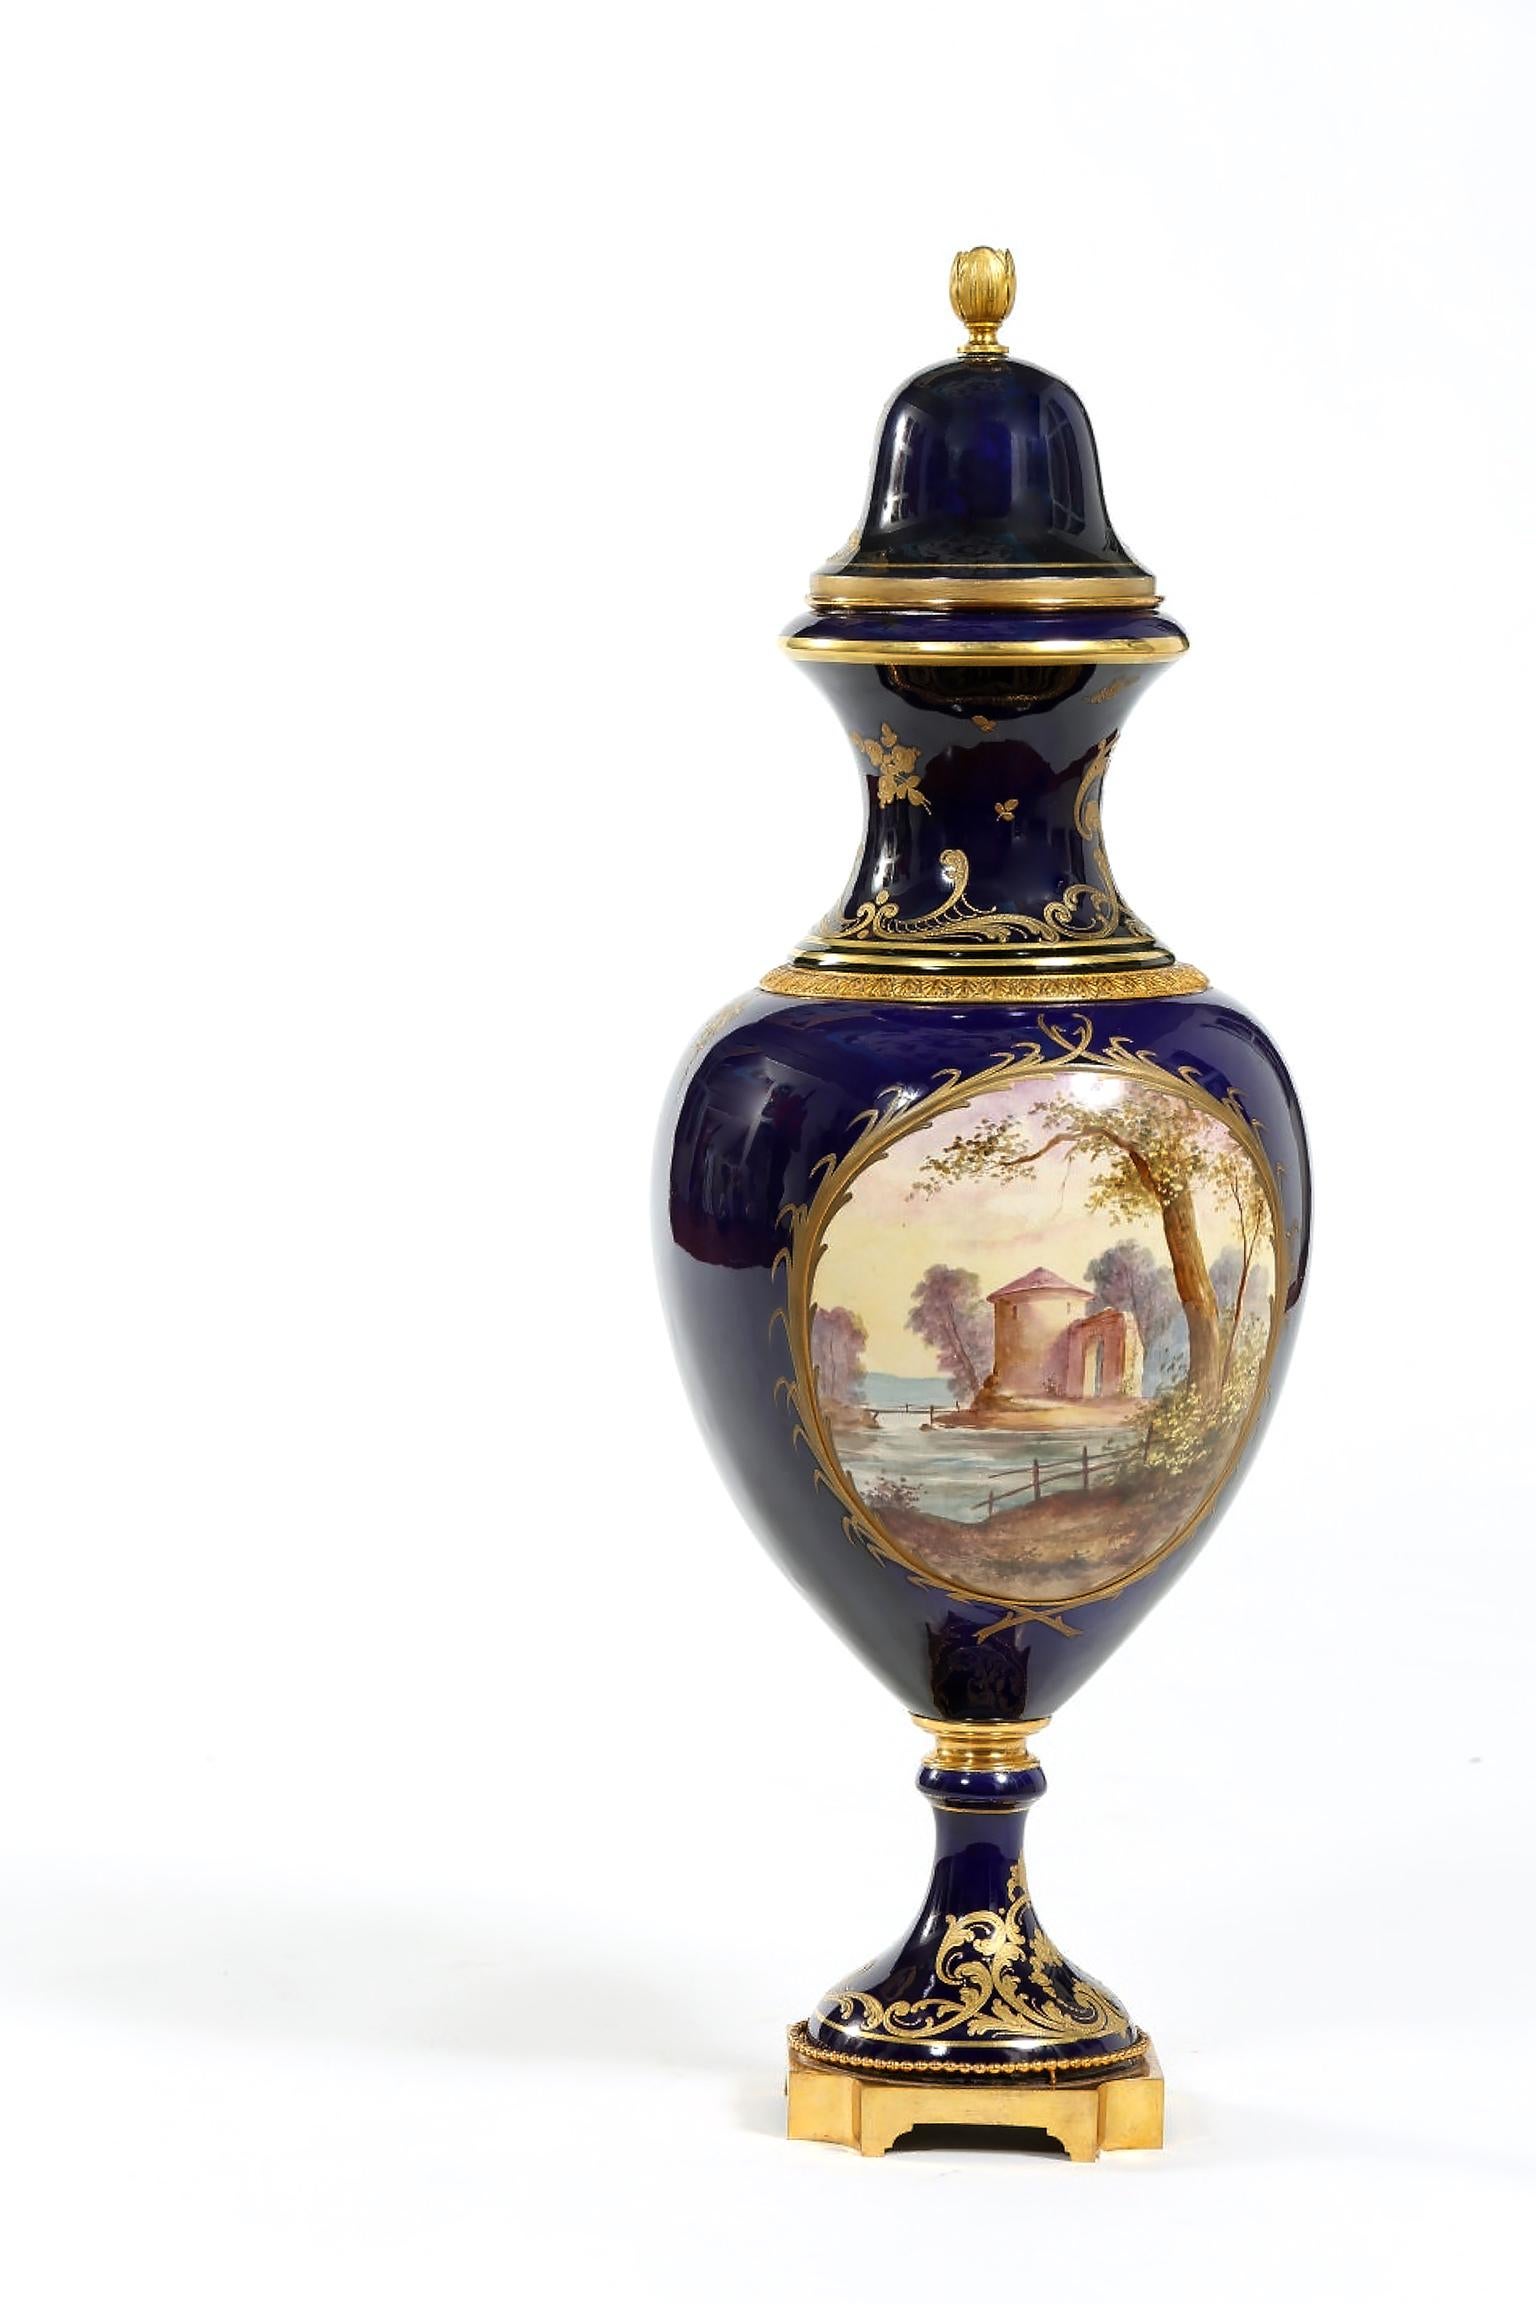 Large 19th century Sevres cobalt blue lidded decorative porcelain urn / centerpiece. The piece is in great antique condition with wear consistent with age / use. Maker's mark undersigned. The Urn stand about 29 inches high X 11 inches diameter 